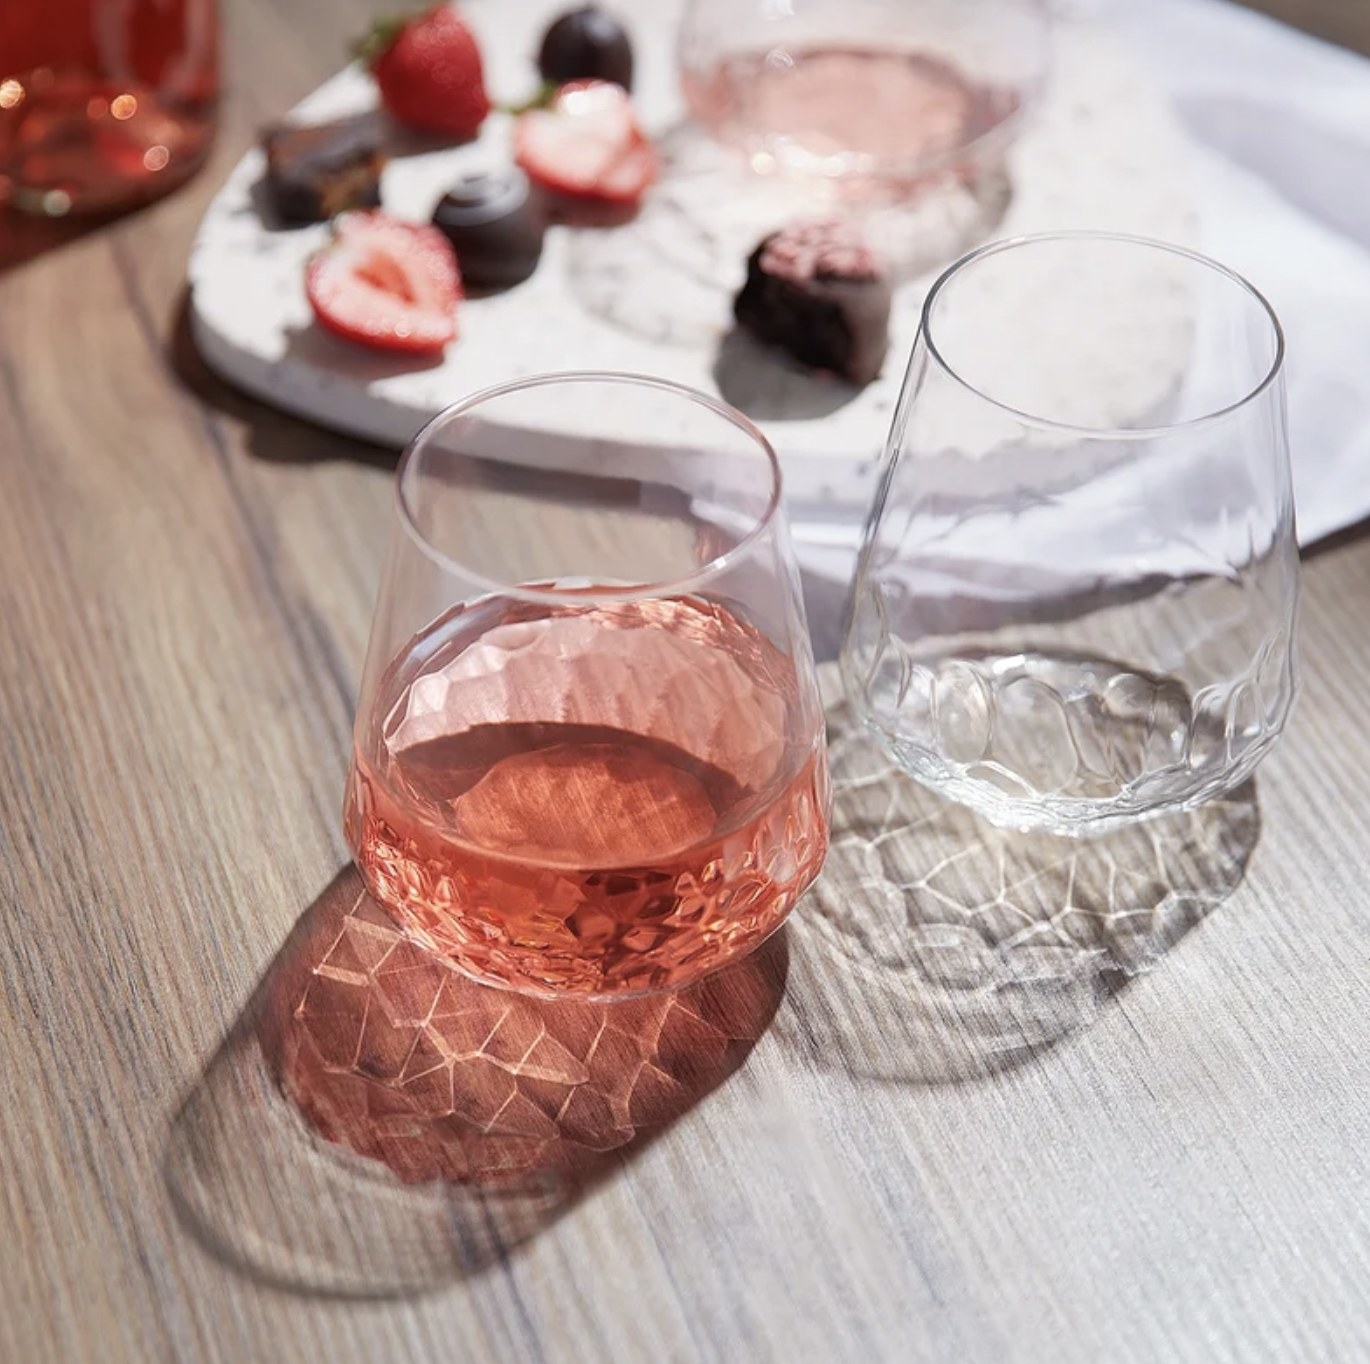 Two of the glasses on table, one filled with rose wine and giving off unique pattern